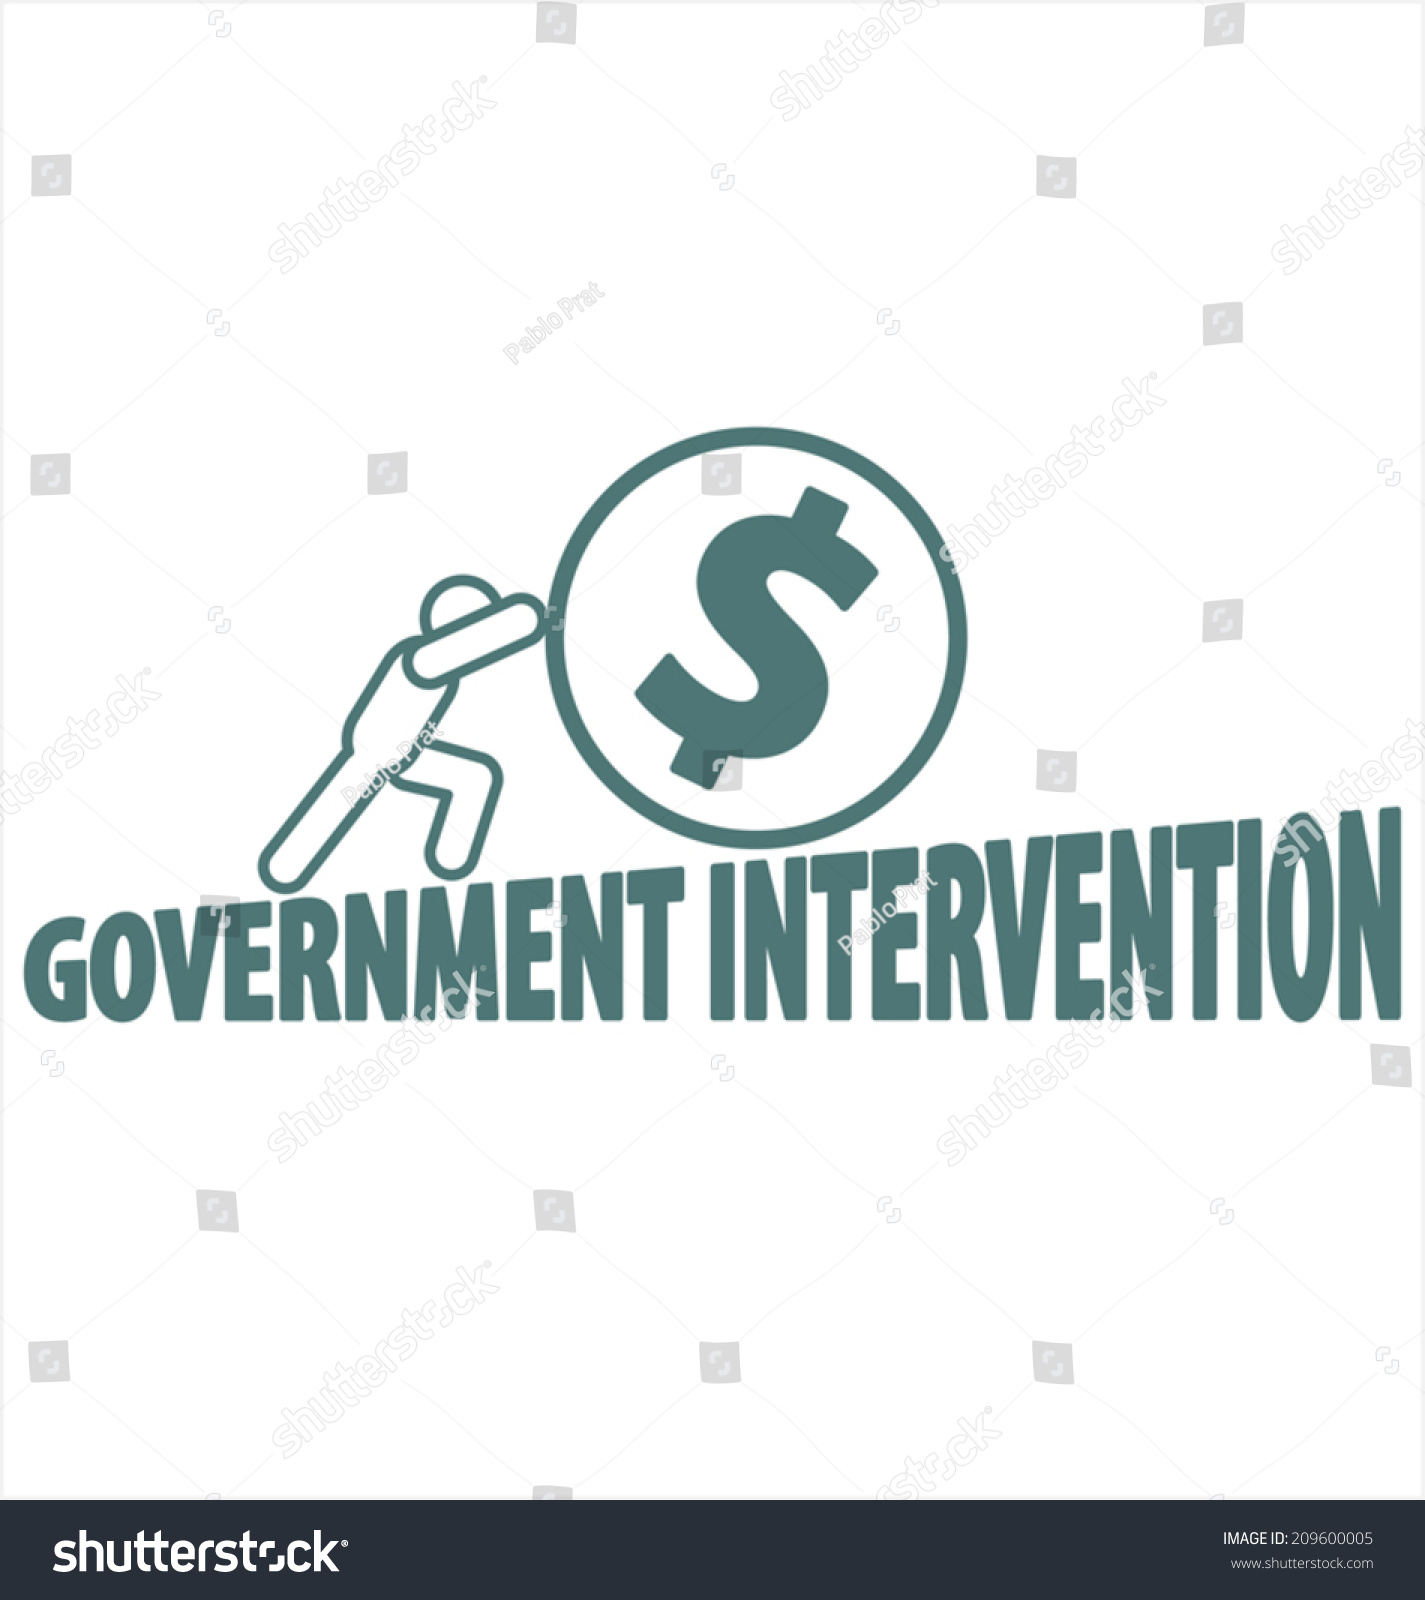 Does Government Intervention Help Promote Economic Stability and Growth? Essay Sample